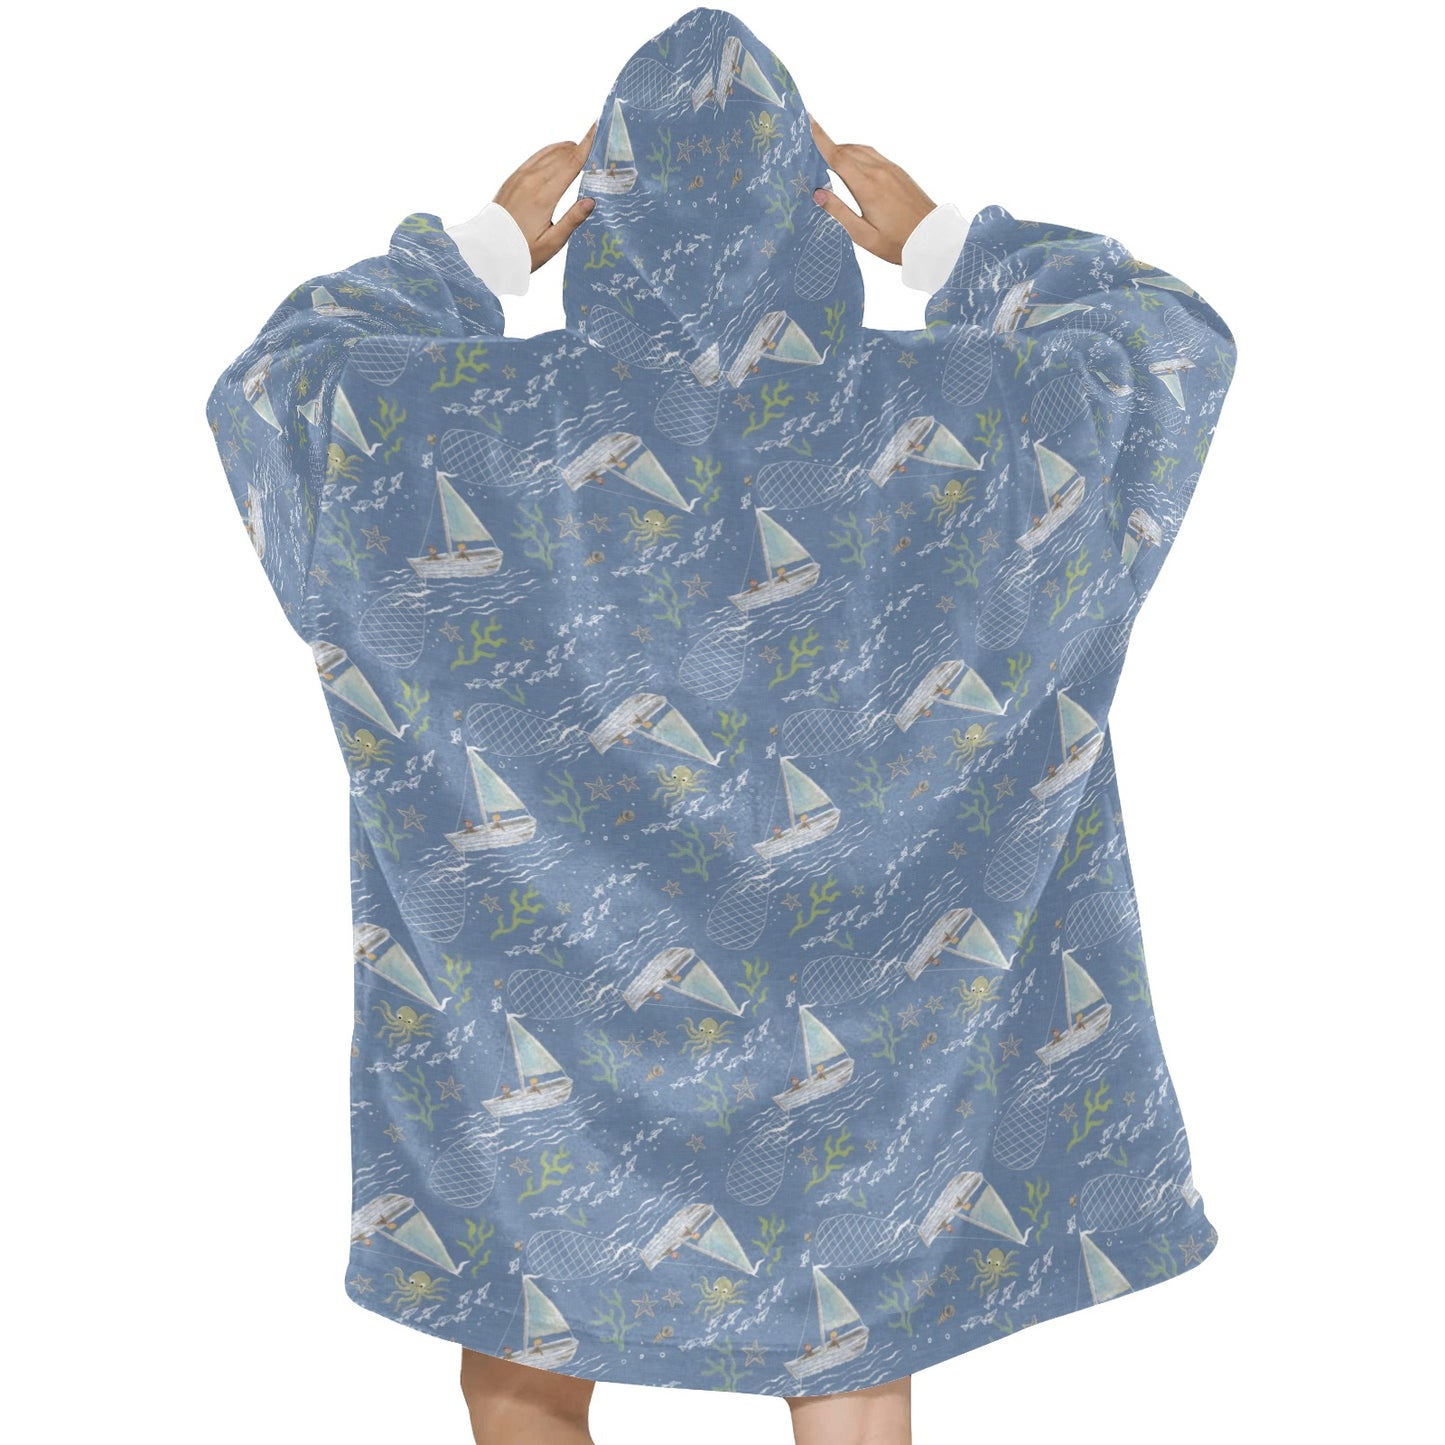 A warm and comfortable fleece hooded blanket in a calming blue boats pattern, similar to the Oodie, perfect for wrapping up and staying snu